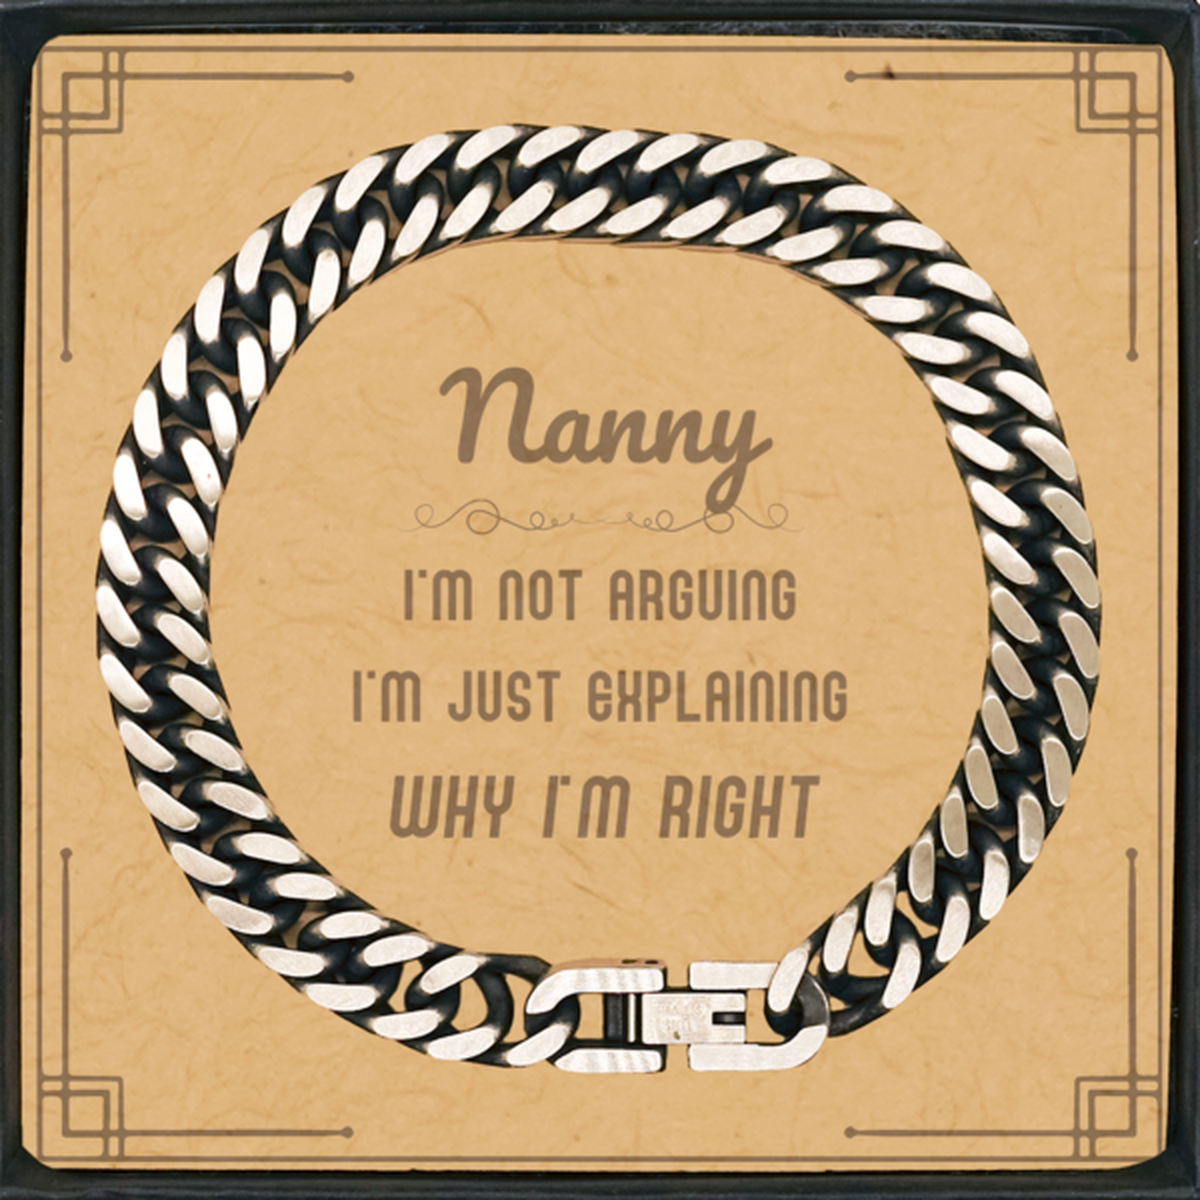 Nanny I'm not Arguing. I'm Just Explaining Why I'm RIGHT Cuban Link Chain Bracelet, Funny Saying Quote Nanny Gifts For Nanny Message Card Graduation Birthday Christmas Gifts for Men Women Coworker